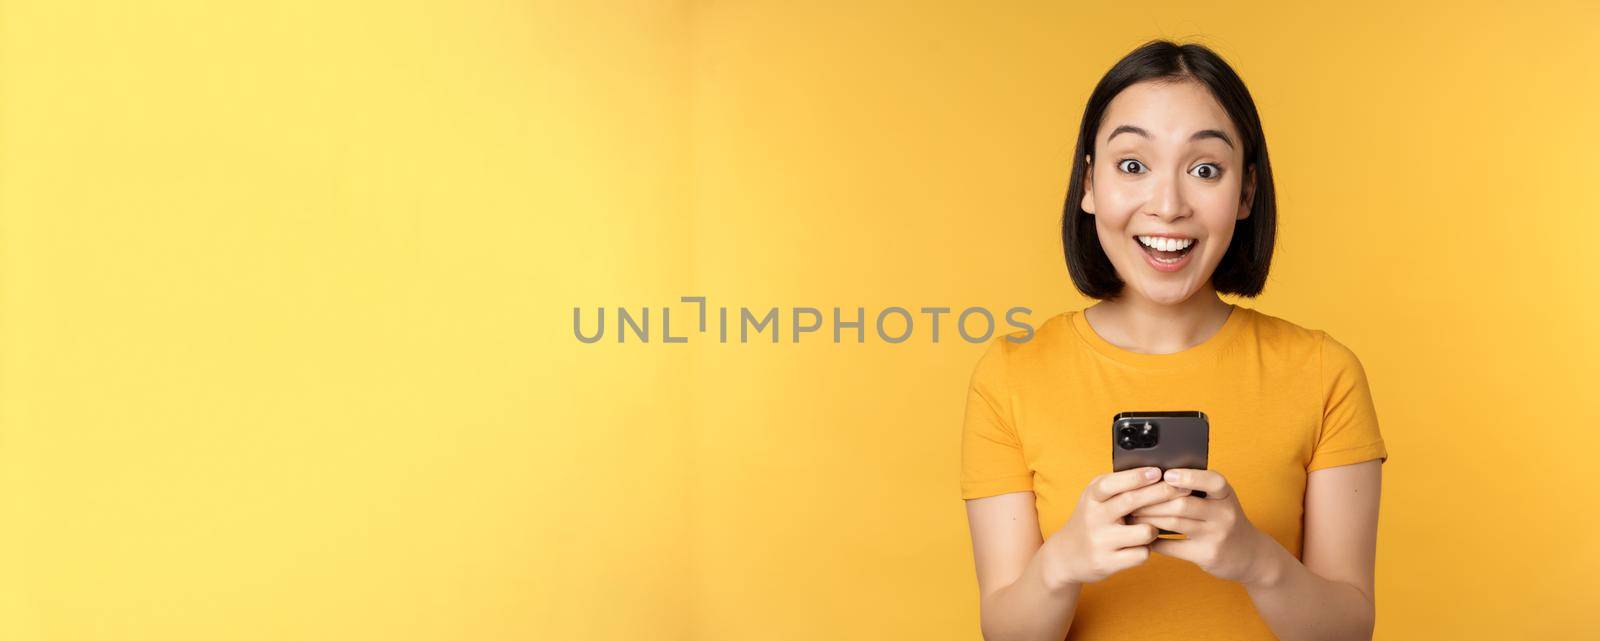 Happy asian girl smiling, standing with black mobile phone, standing against yellow background. Copy space